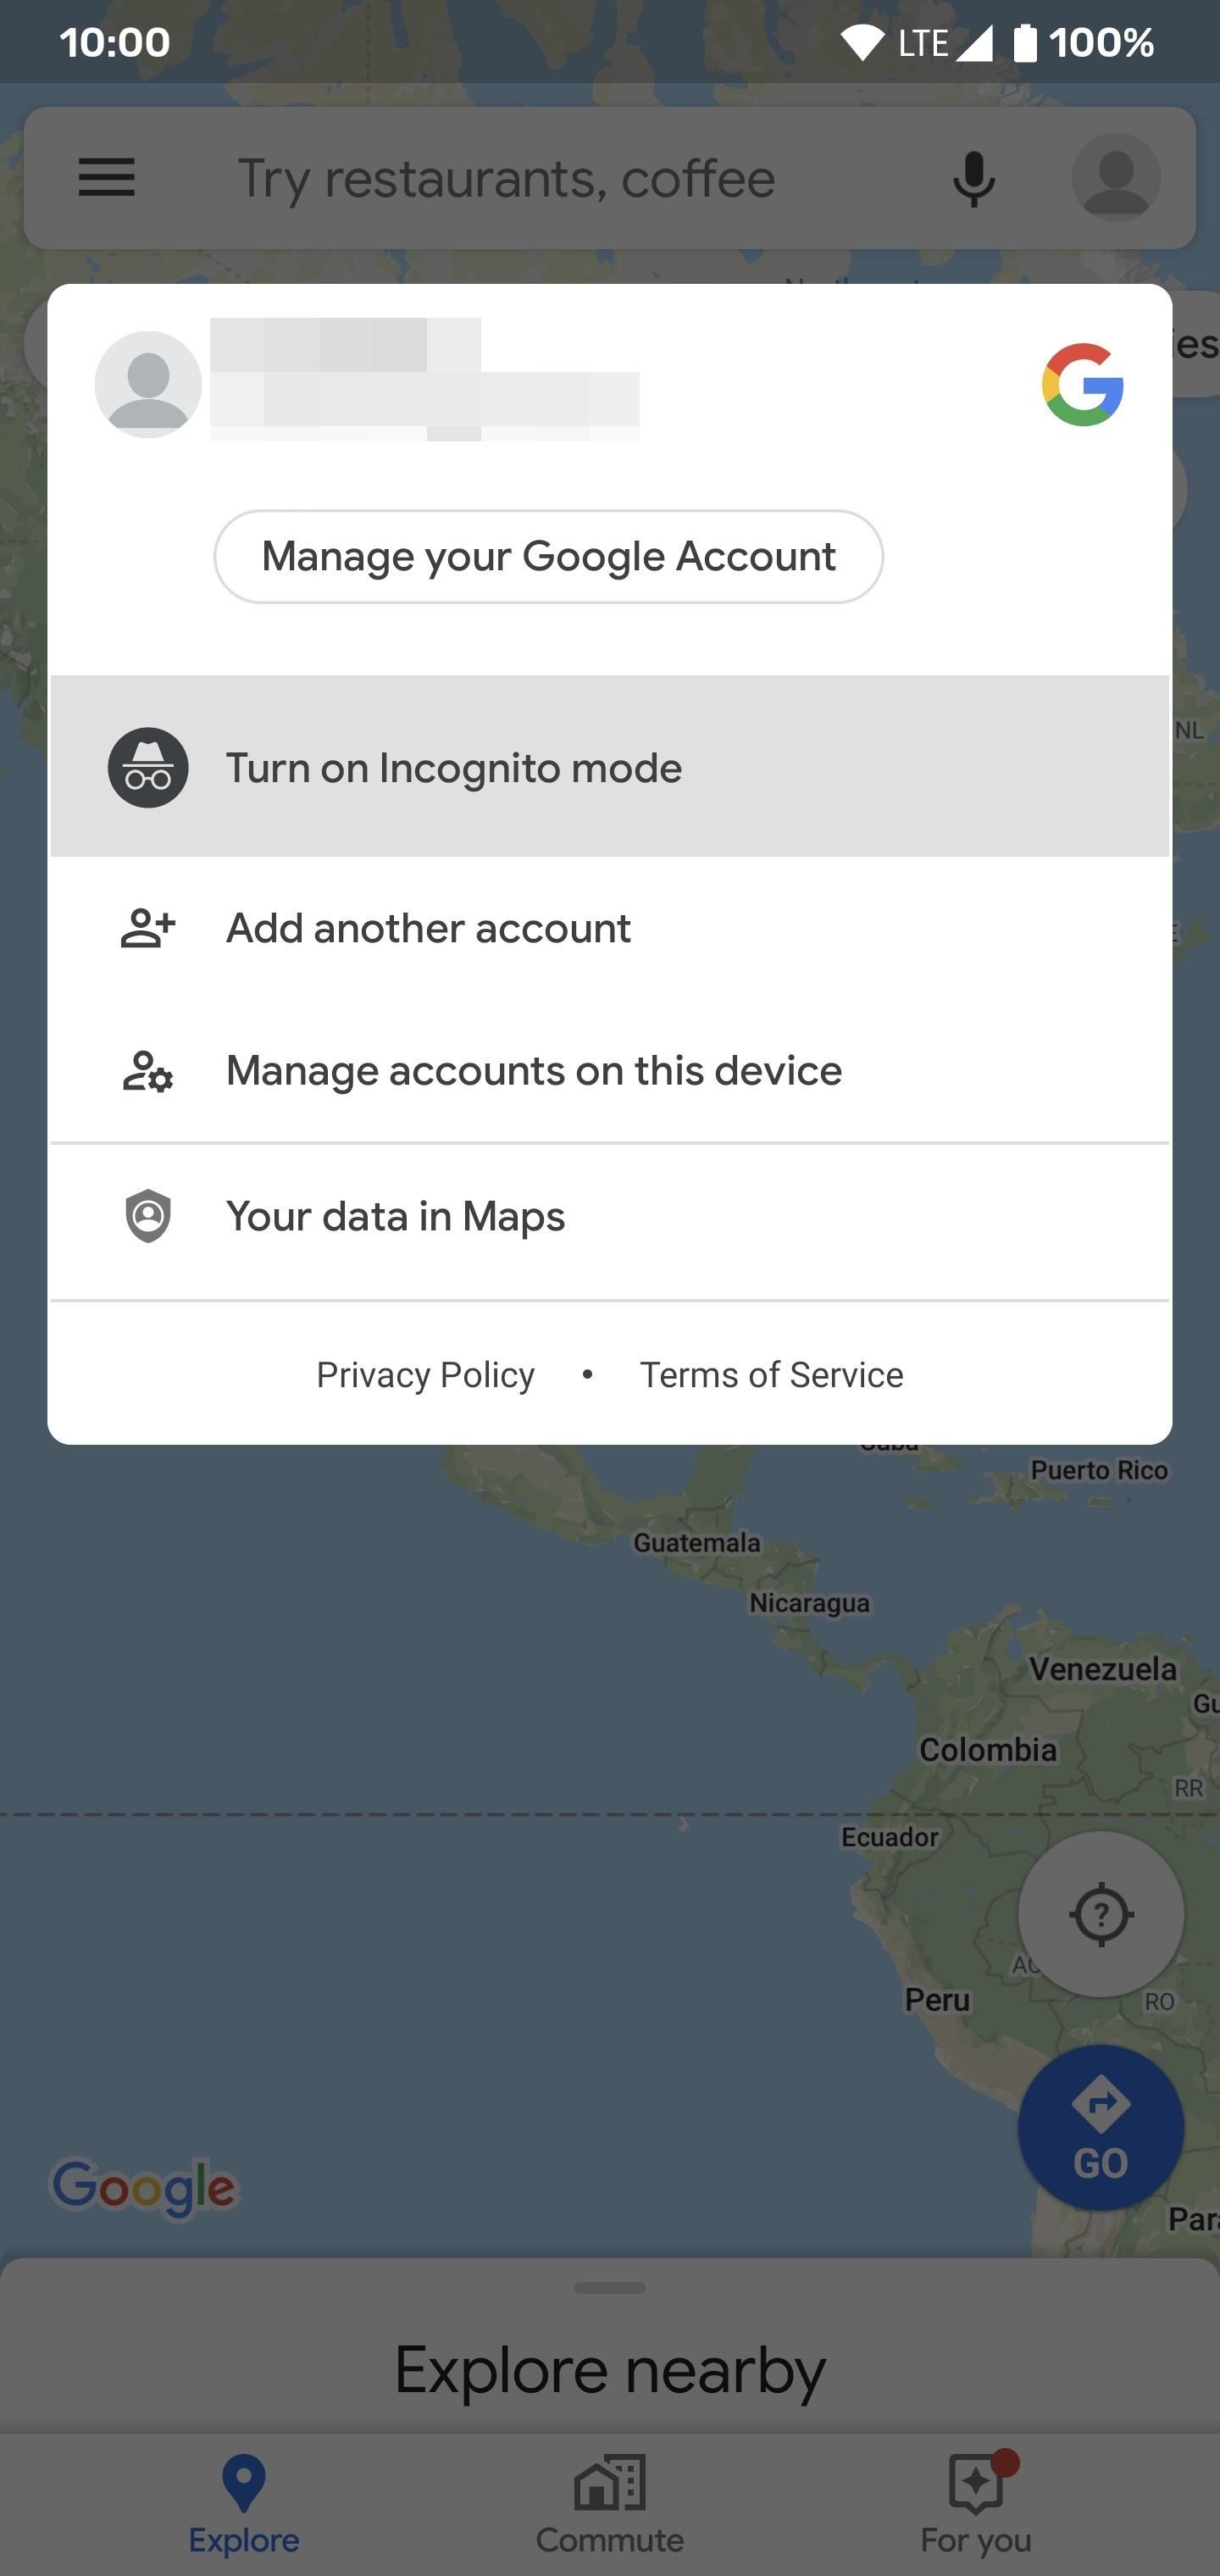 How to Use Incognito Mode in Google Maps to Keep Your Search & Location History Private